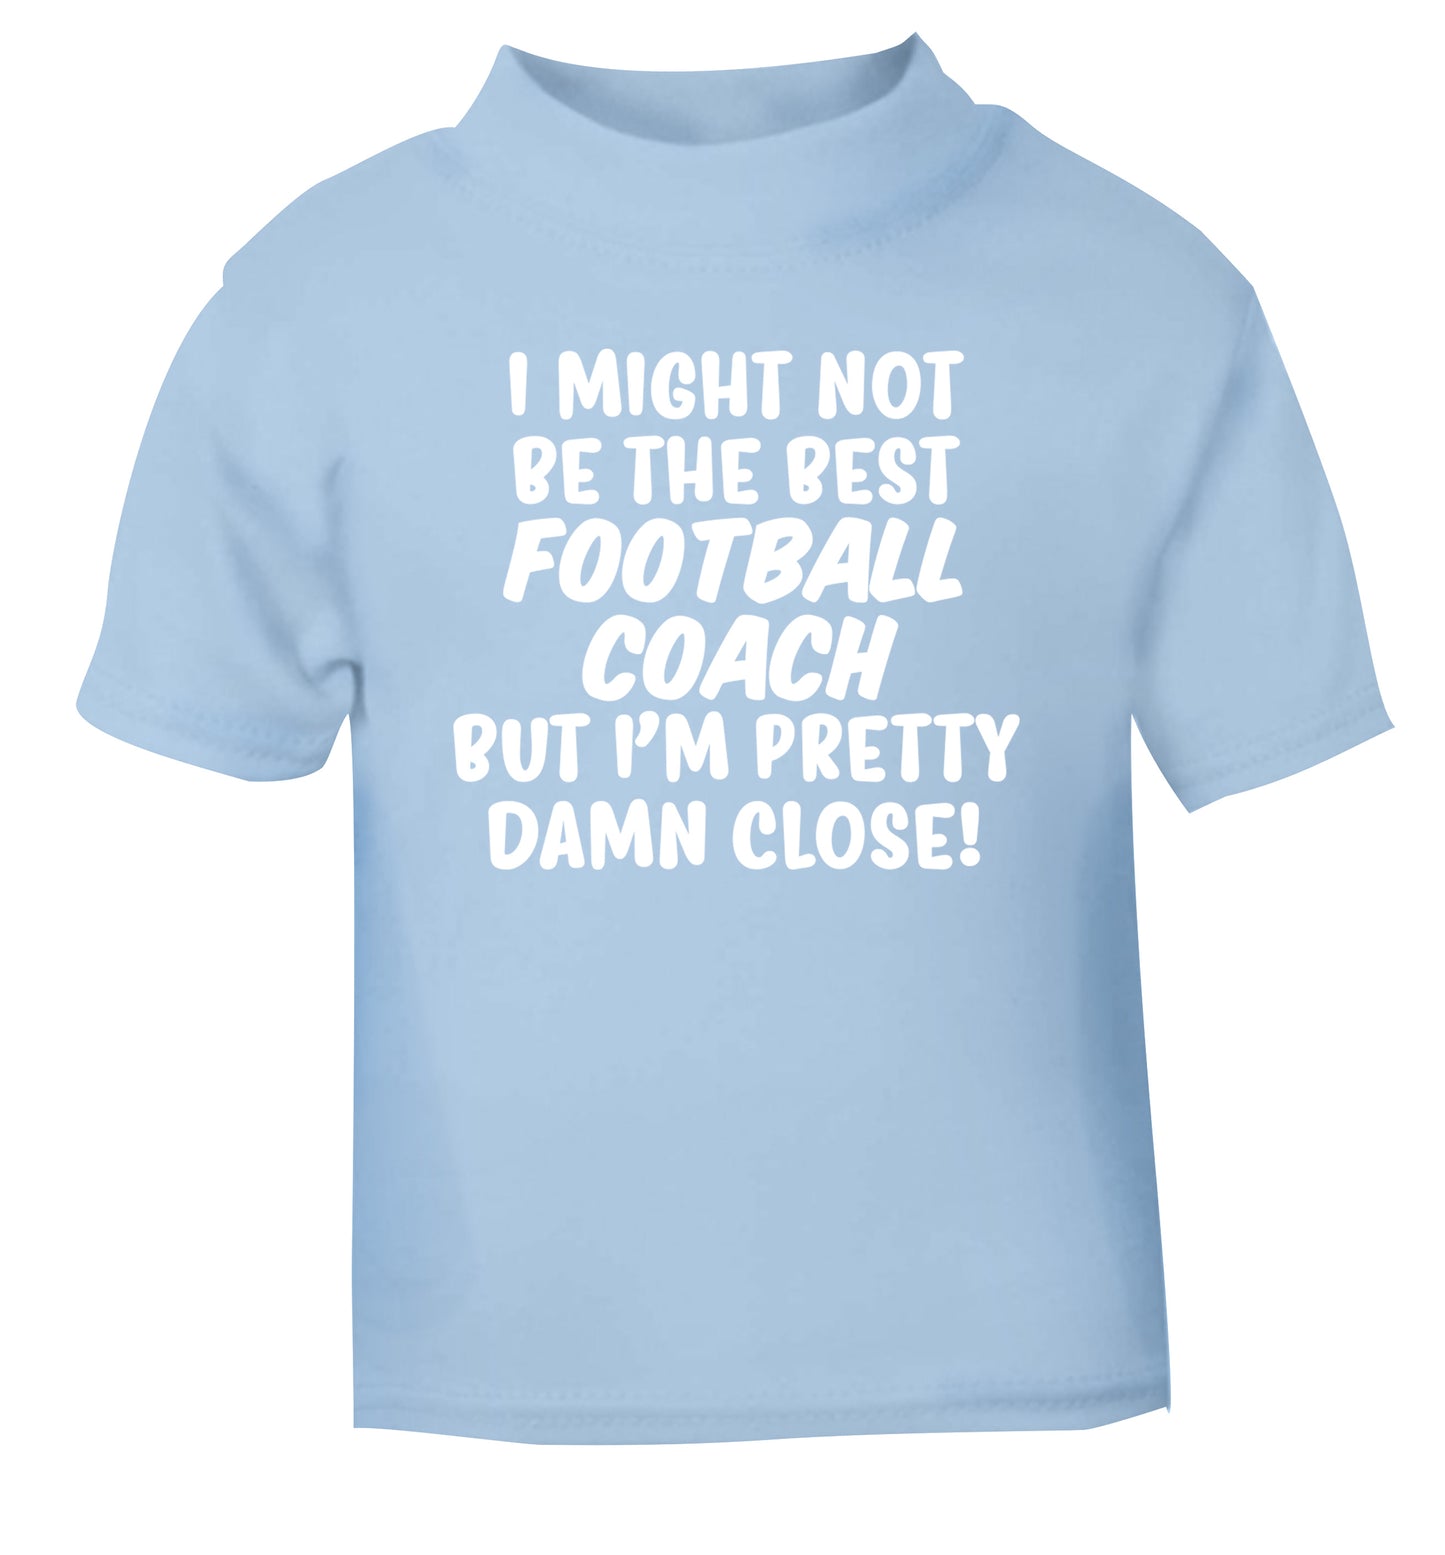 I might not be the best football coach but I'm pretty close! light blue Baby Toddler Tshirt 2 Years